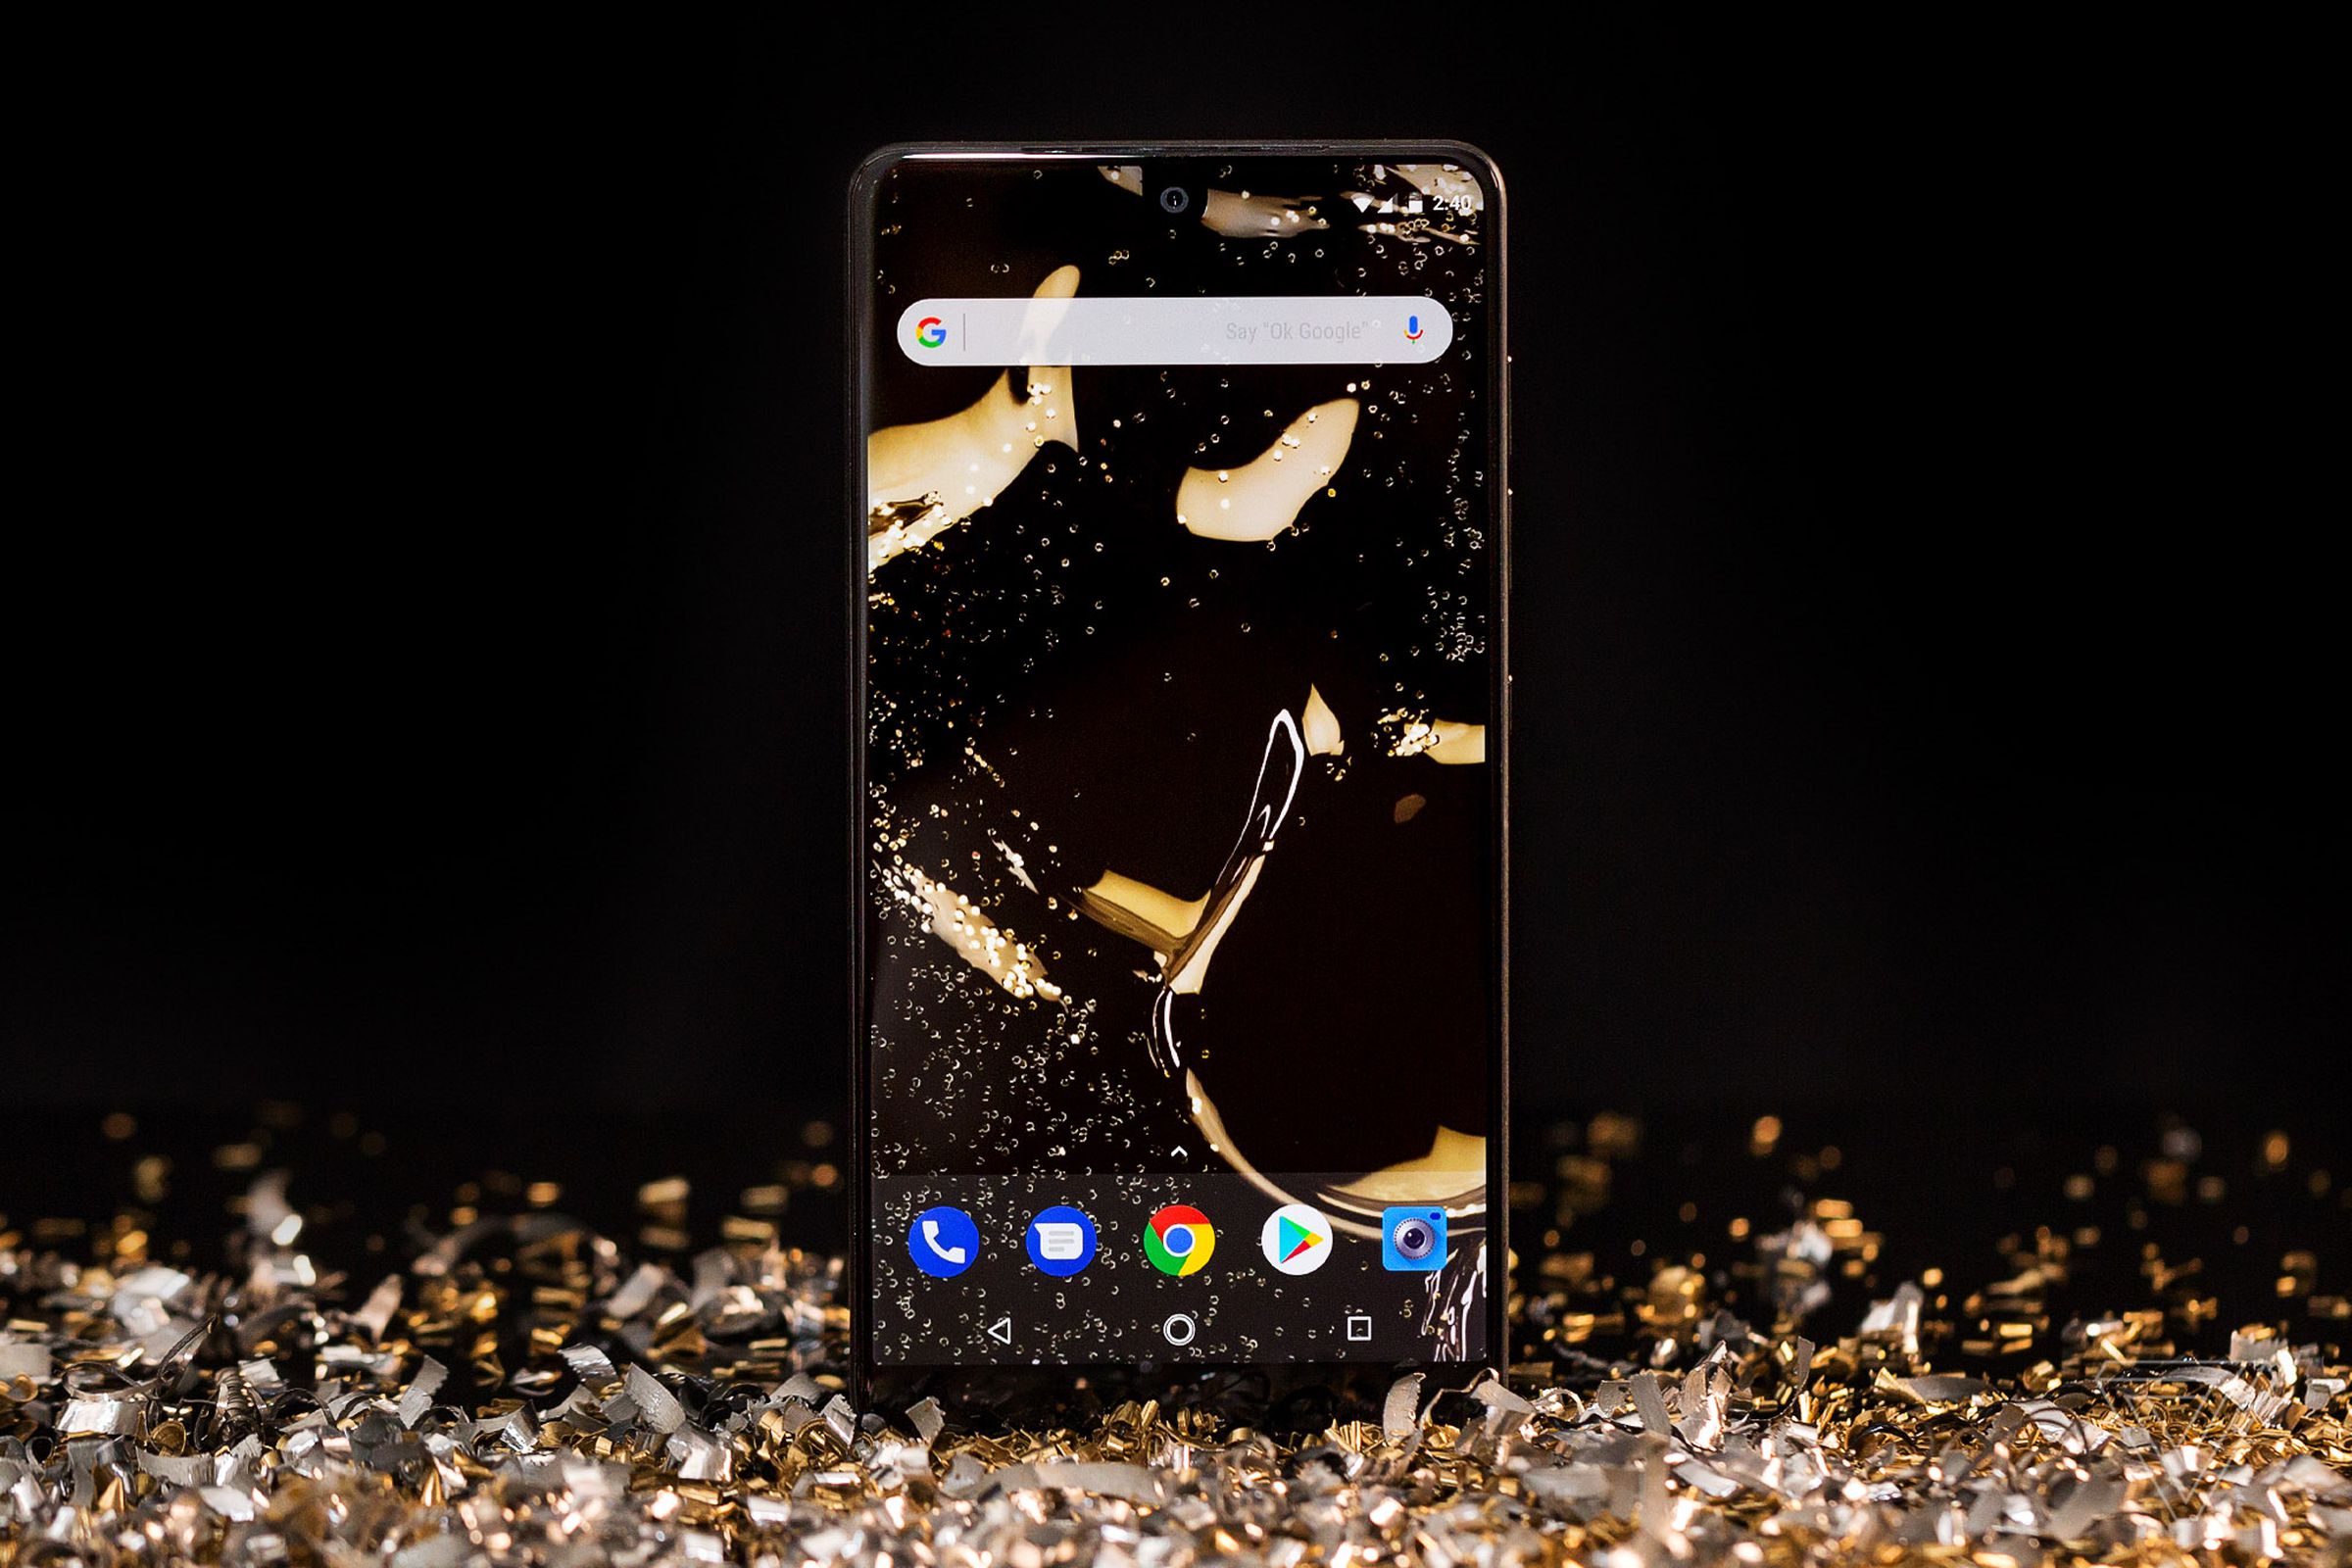 The Essential Phone was the only product Essential brought to market before closing its doors in 2020.